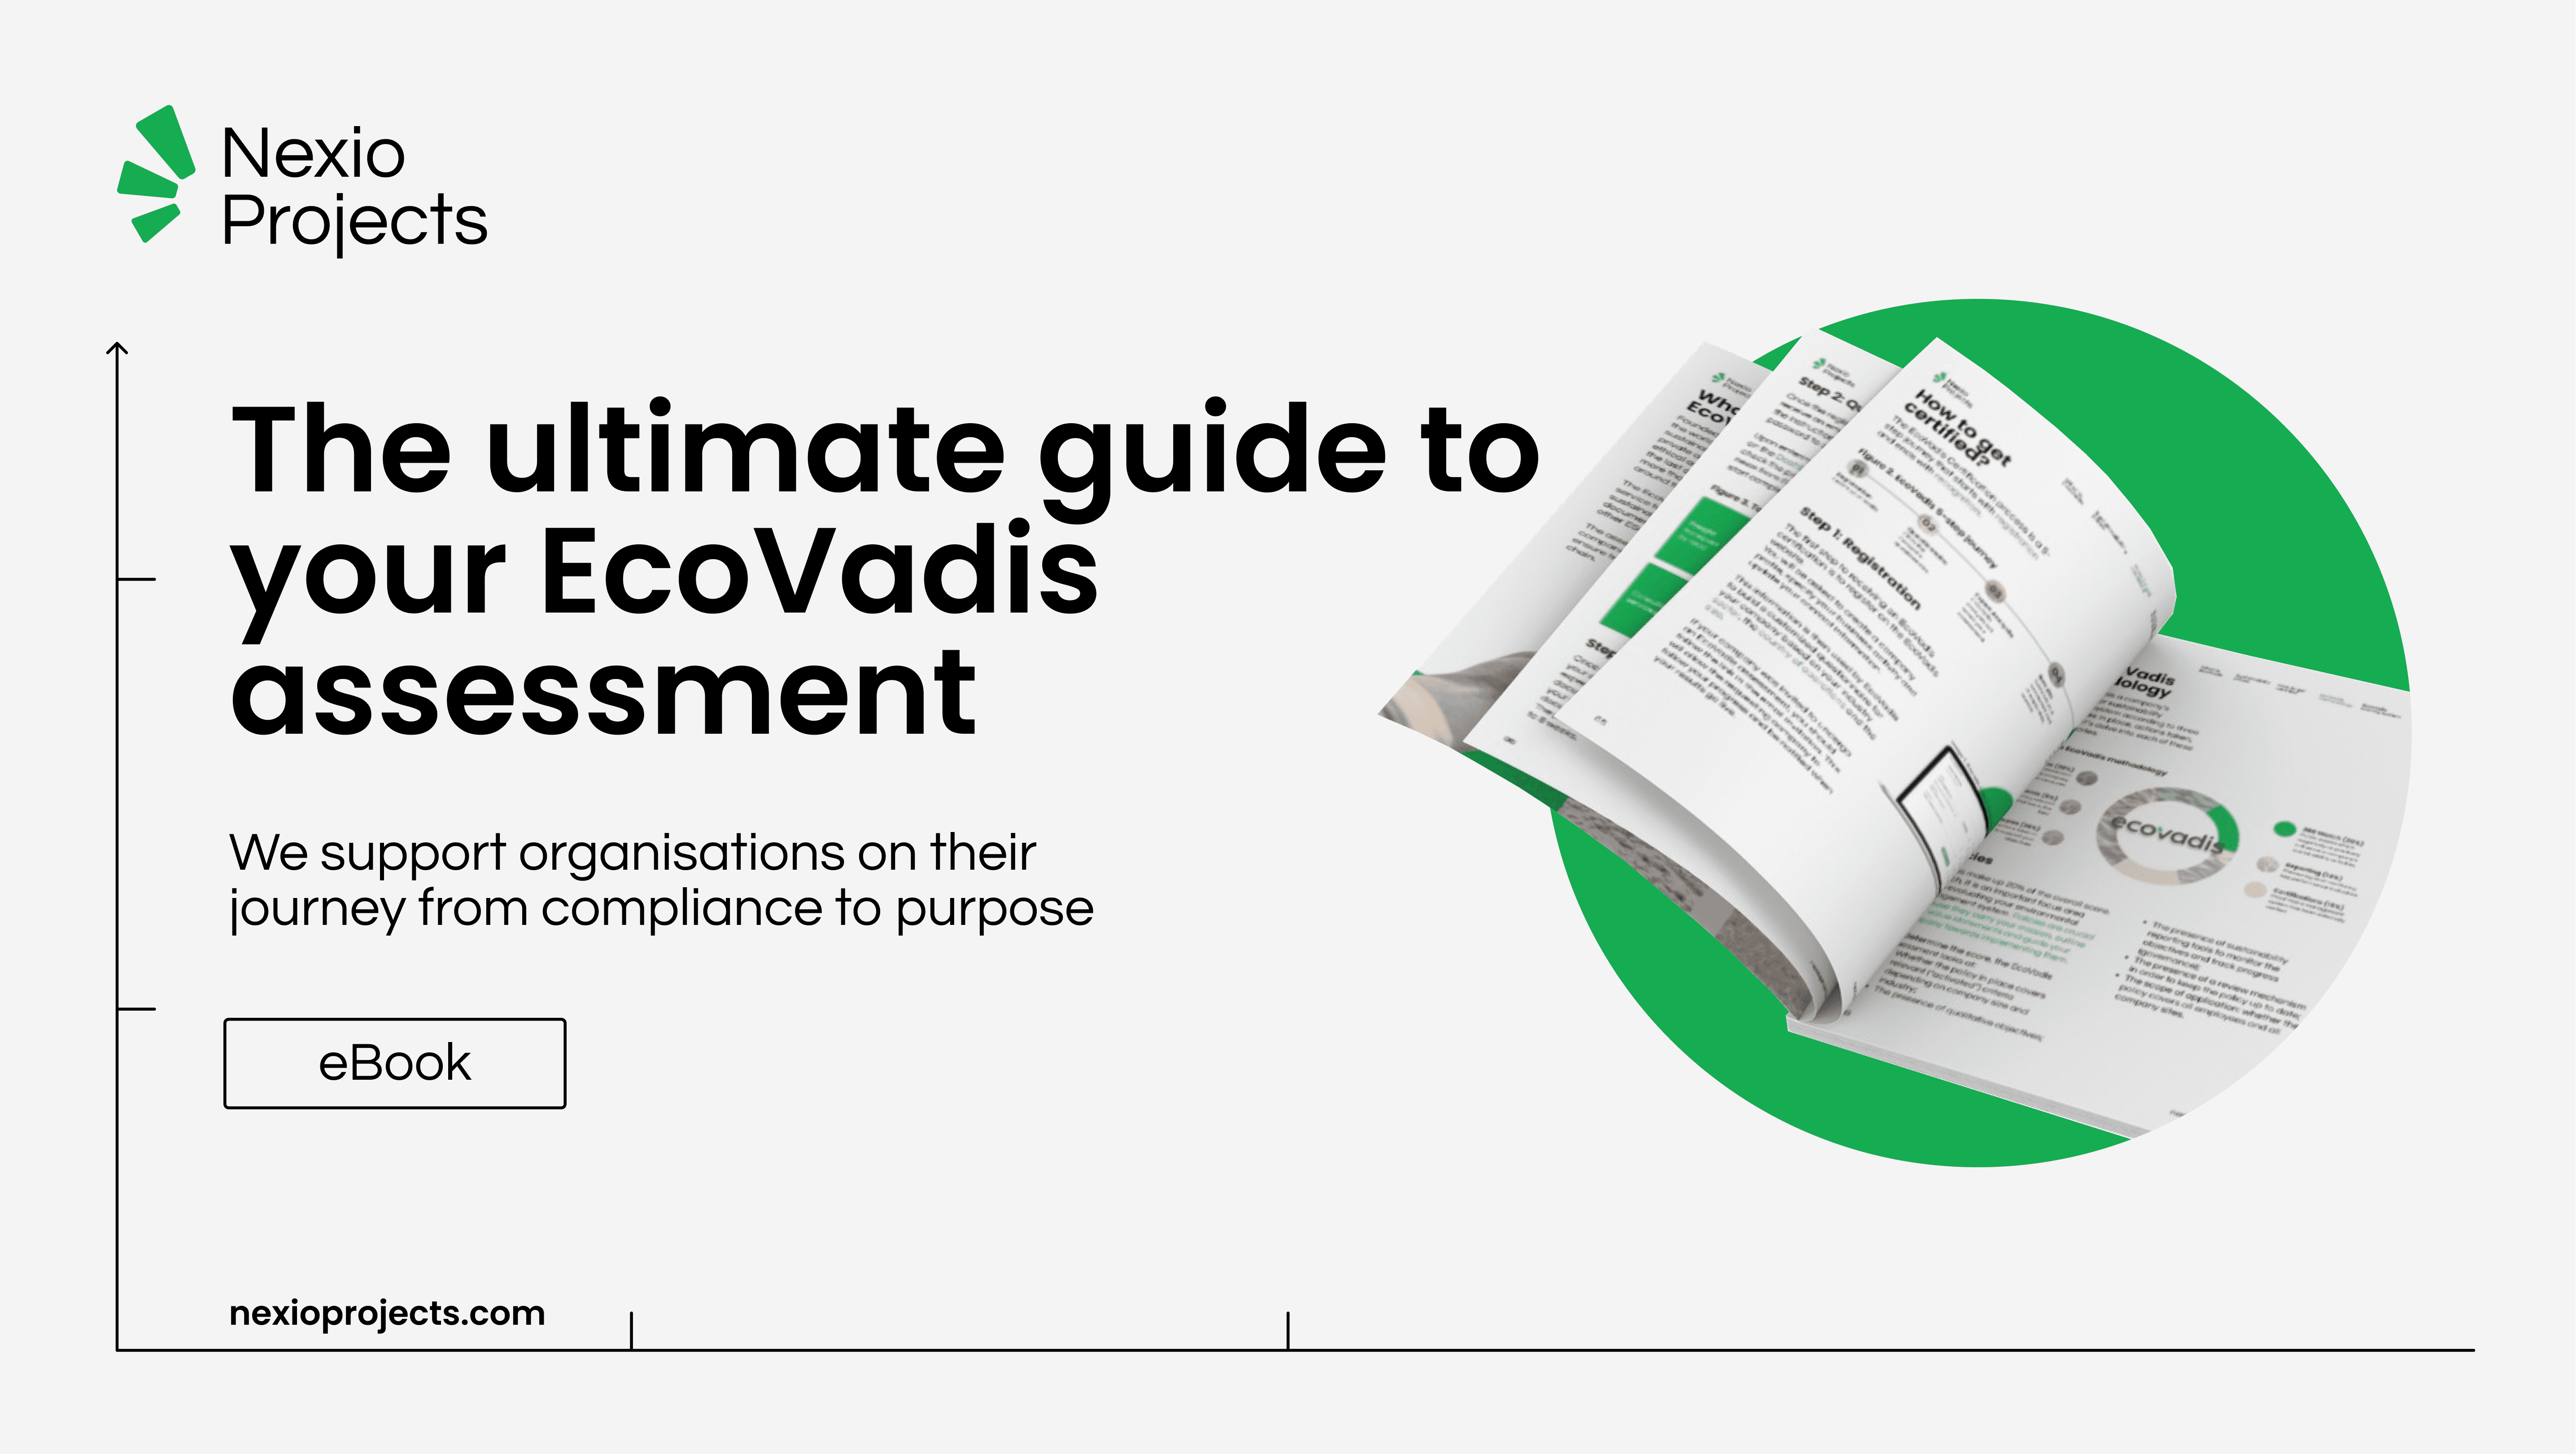 E-The ultimate guide to your EcoVadis assessment